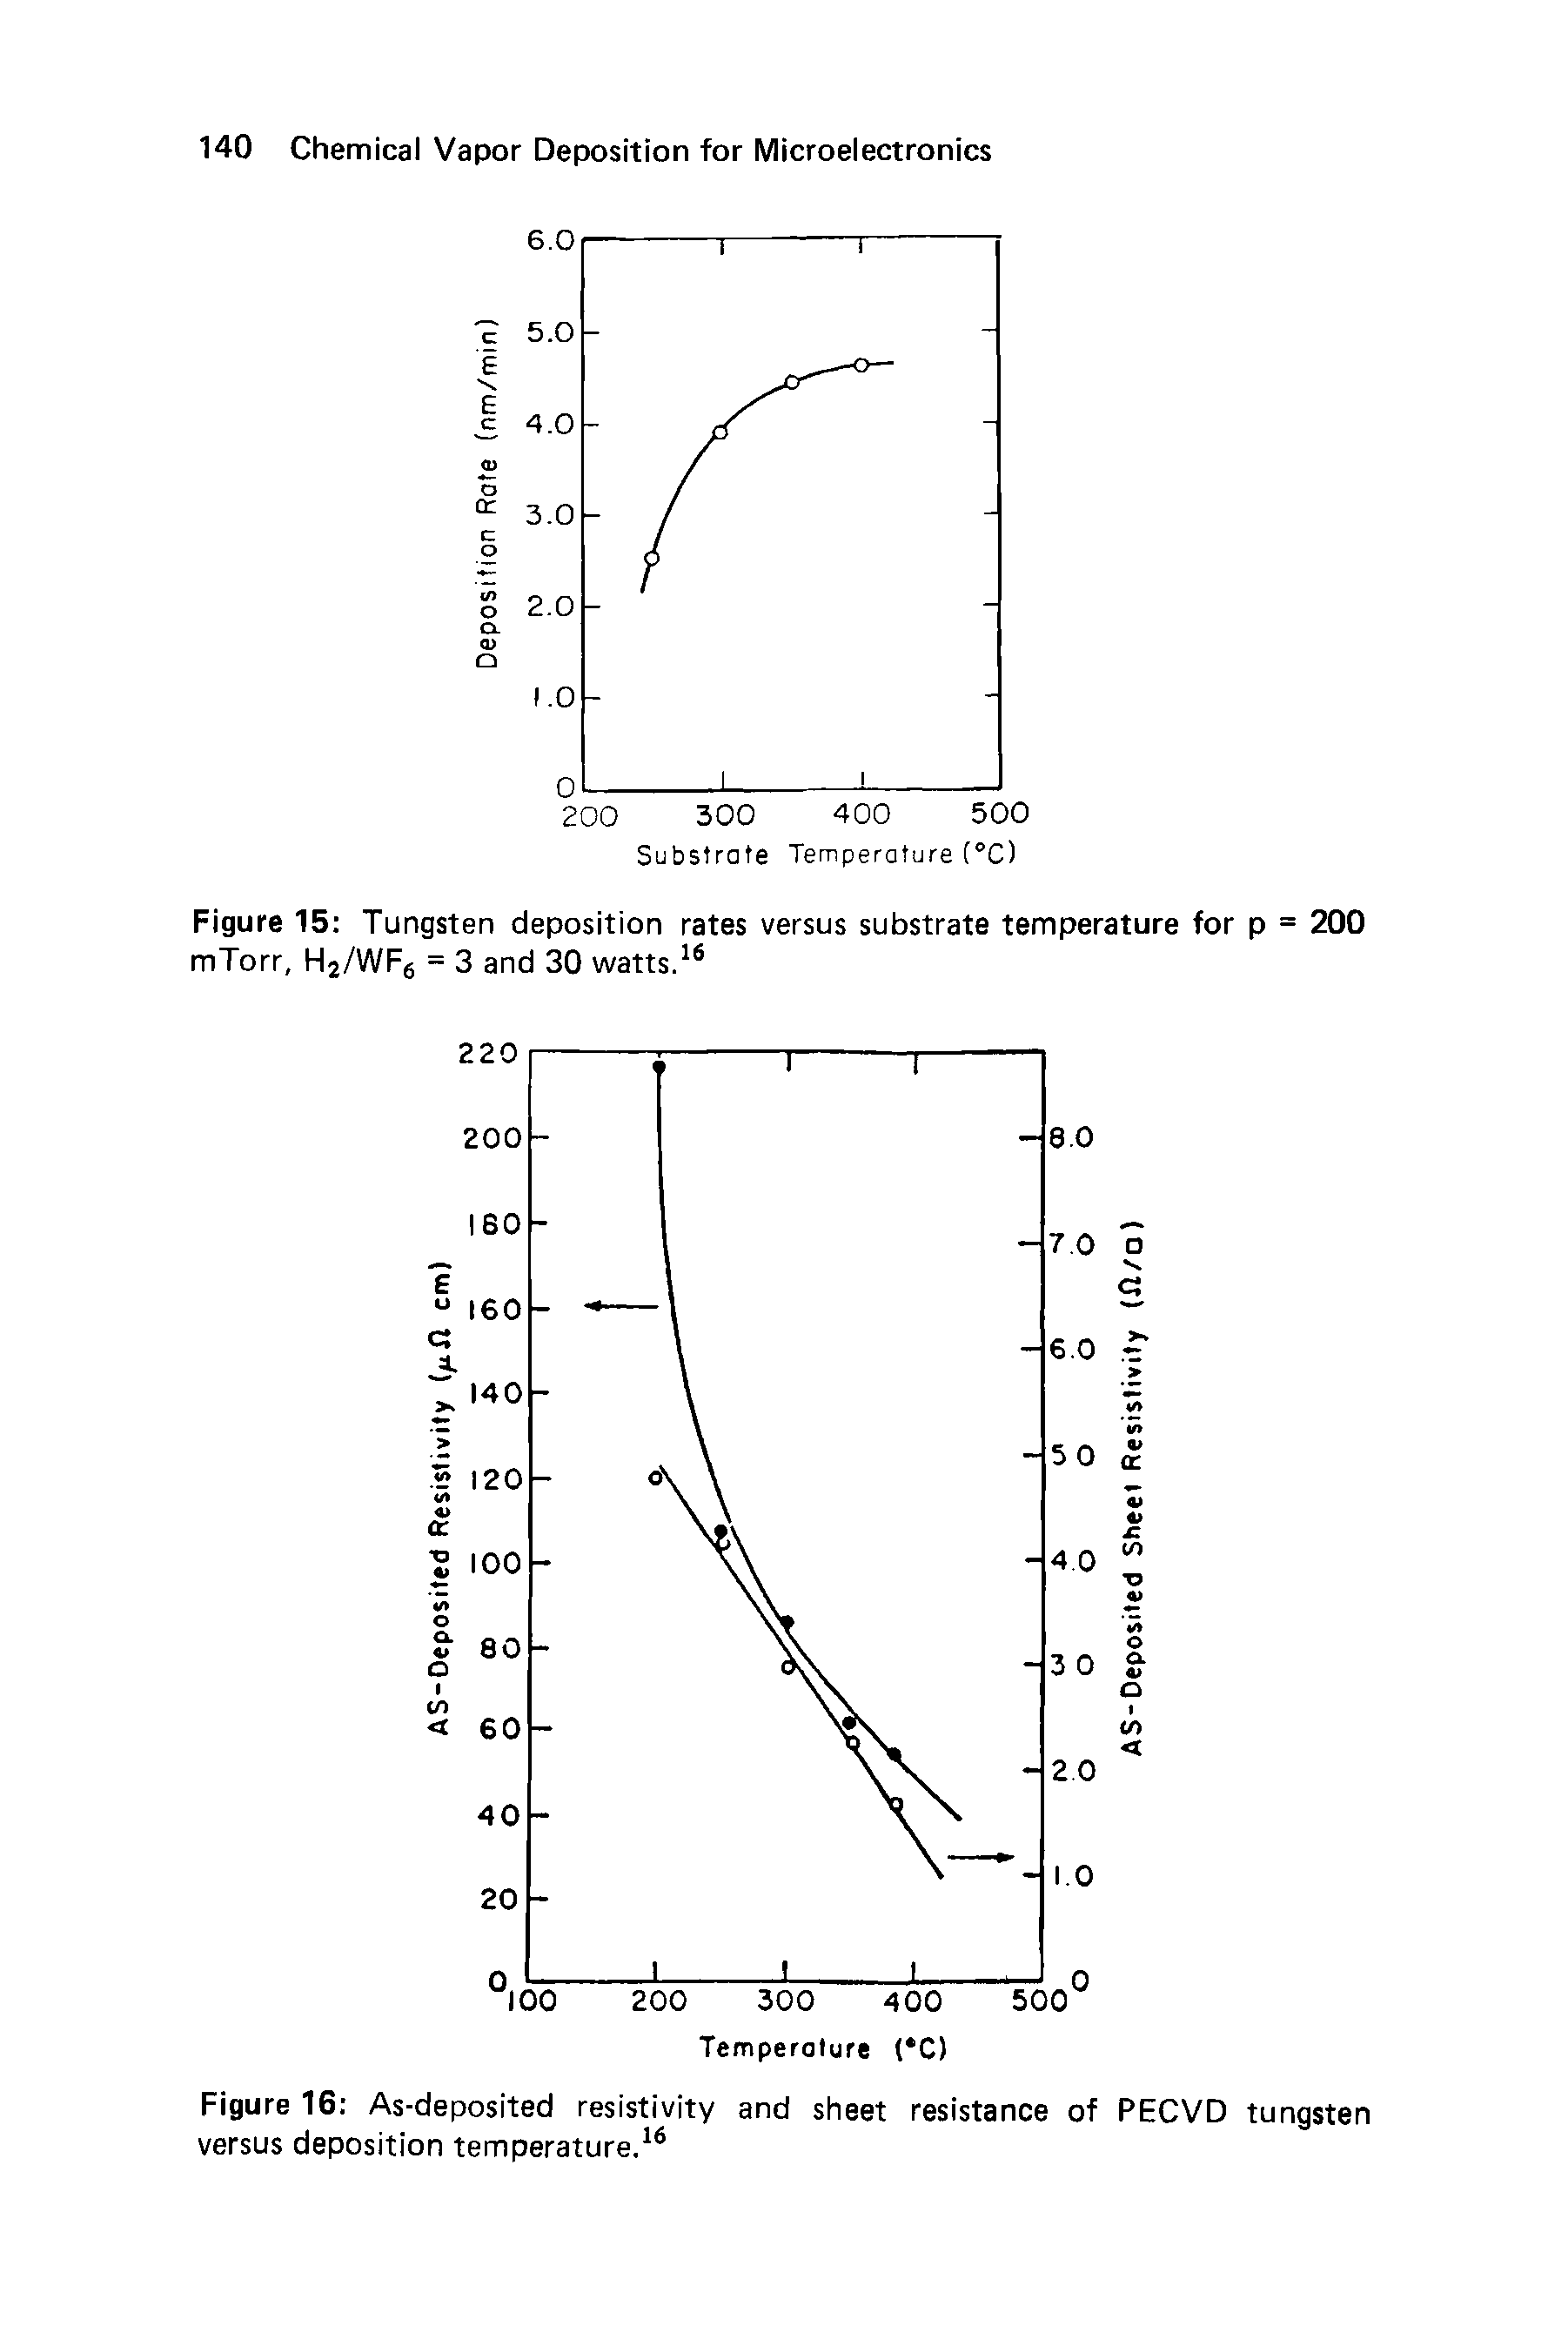 Figure 15 Tungsten deposition rates versus substrate temperature for p = 200 mTorr, H2/WF6 = 3 and 30 watts.16...